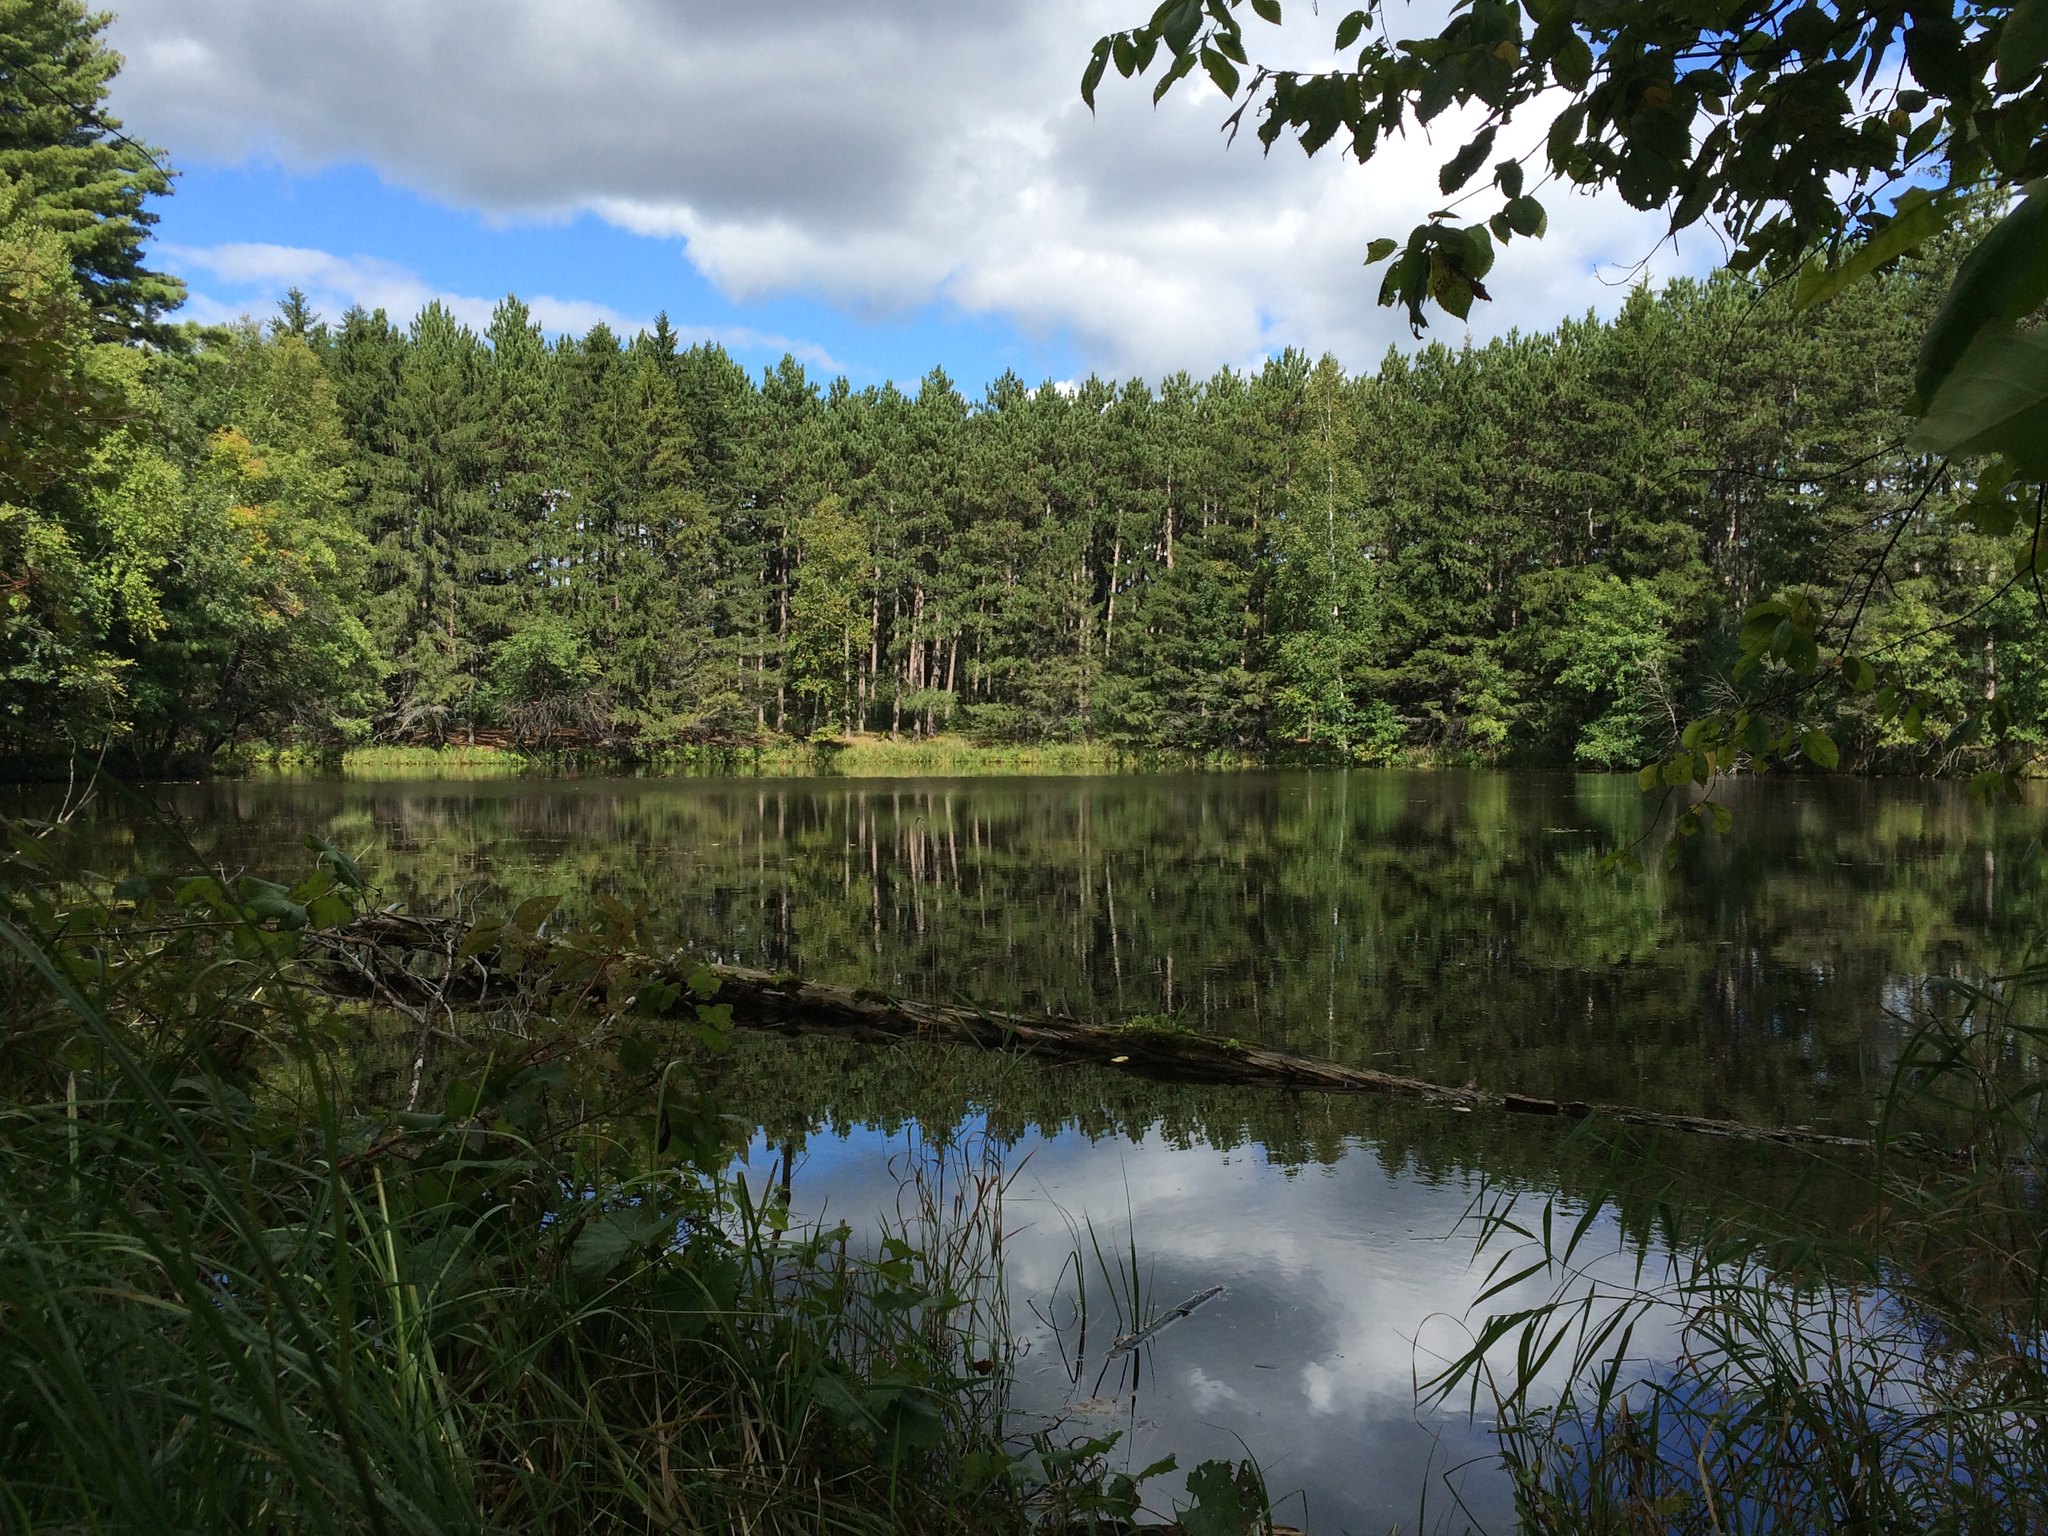 A lake surrounded by tall pine trees. There is blue sky with large white clouds, which is also reflected in the water.